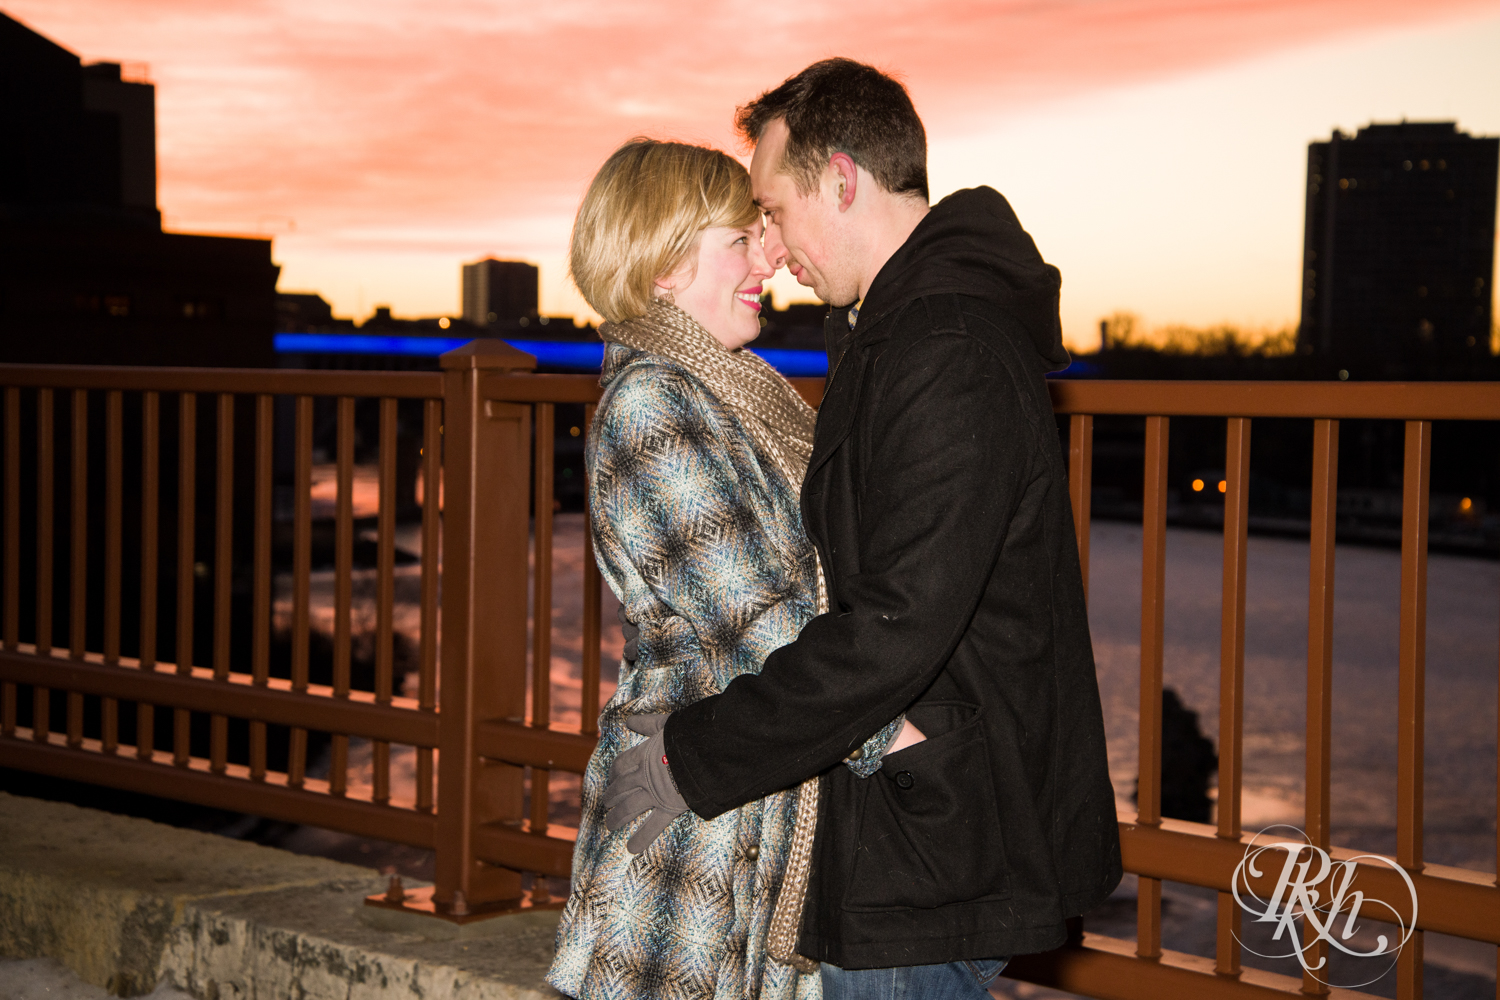 Man and woman smile during sunrise engagement photography on Stone Arch Bridge in Minneapolis, Minnesota.